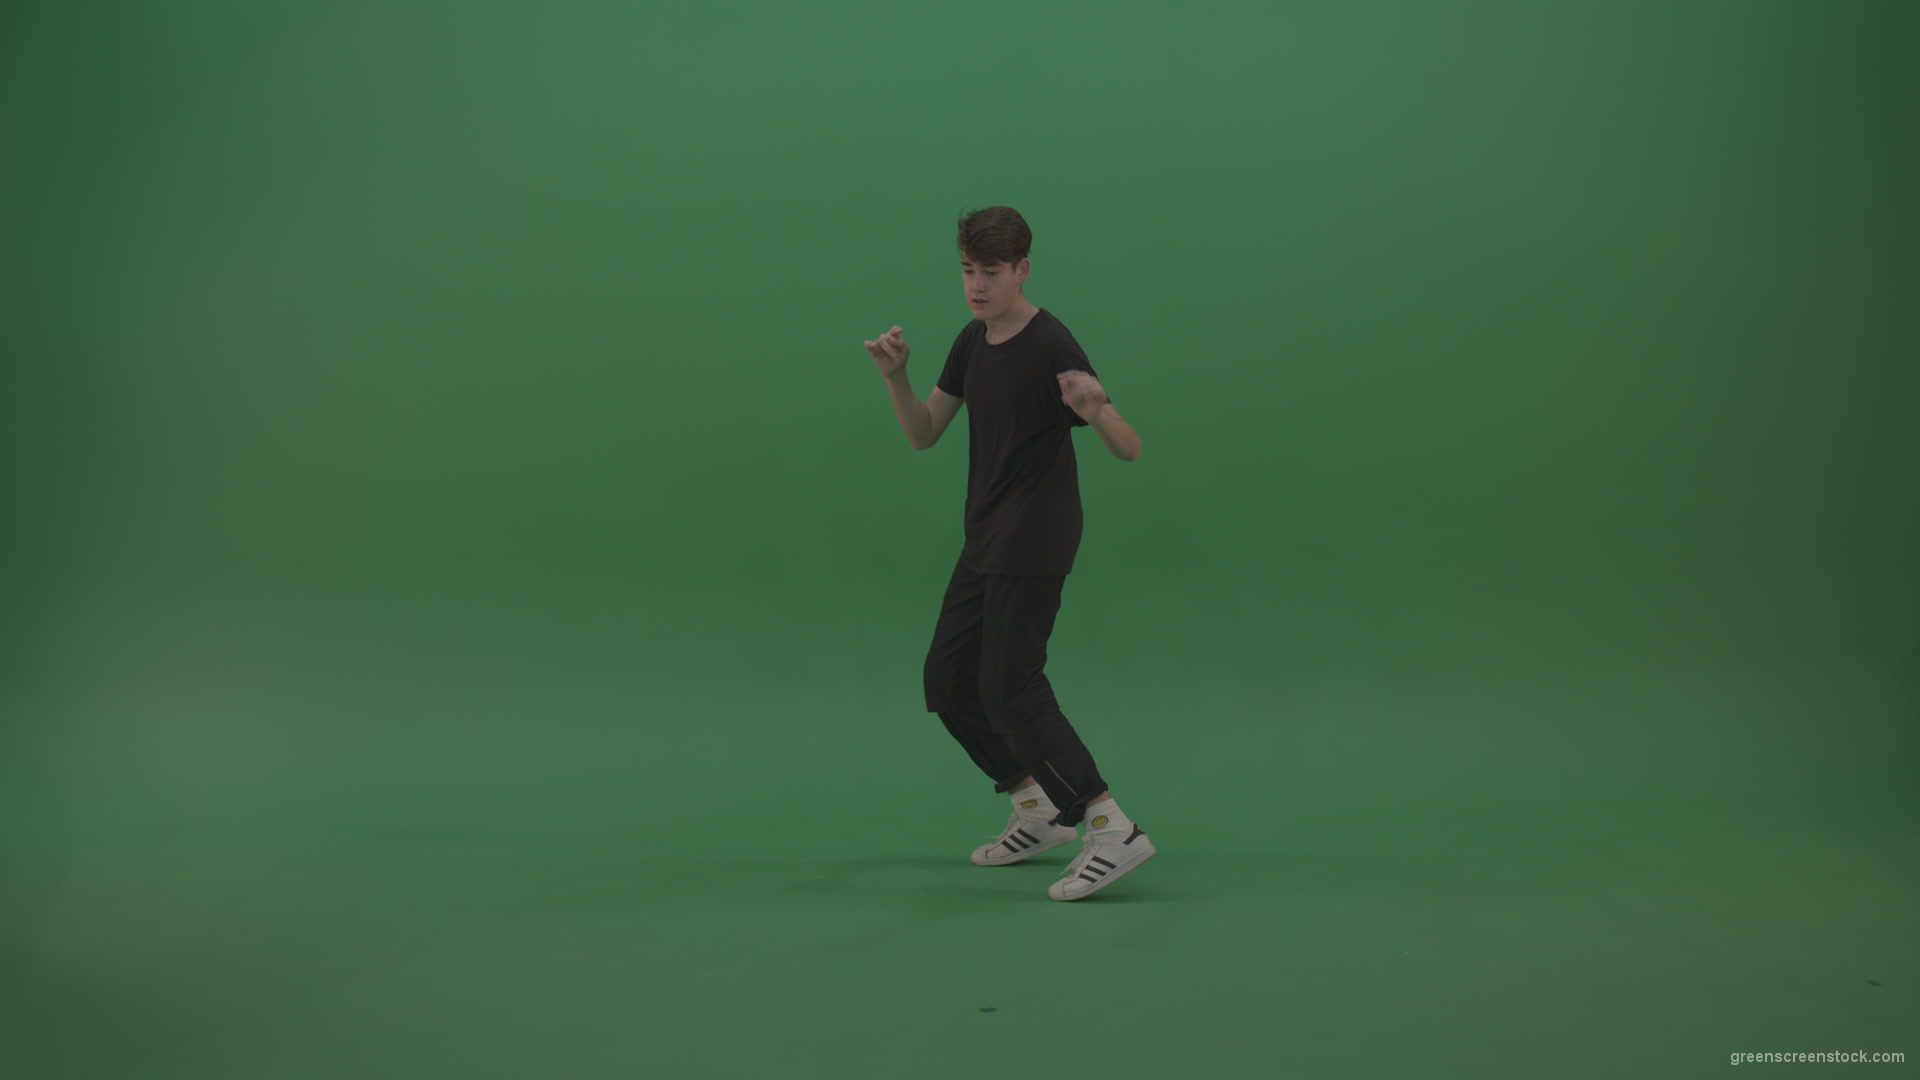 Young_Brunette_Boy_Showing_Awesome_Hip_Hop_Dance_Technical_Skills_With_Robot_Tought_Moves_On_Green_Screen_Chroma_Key_Background_009 Green Screen Stock